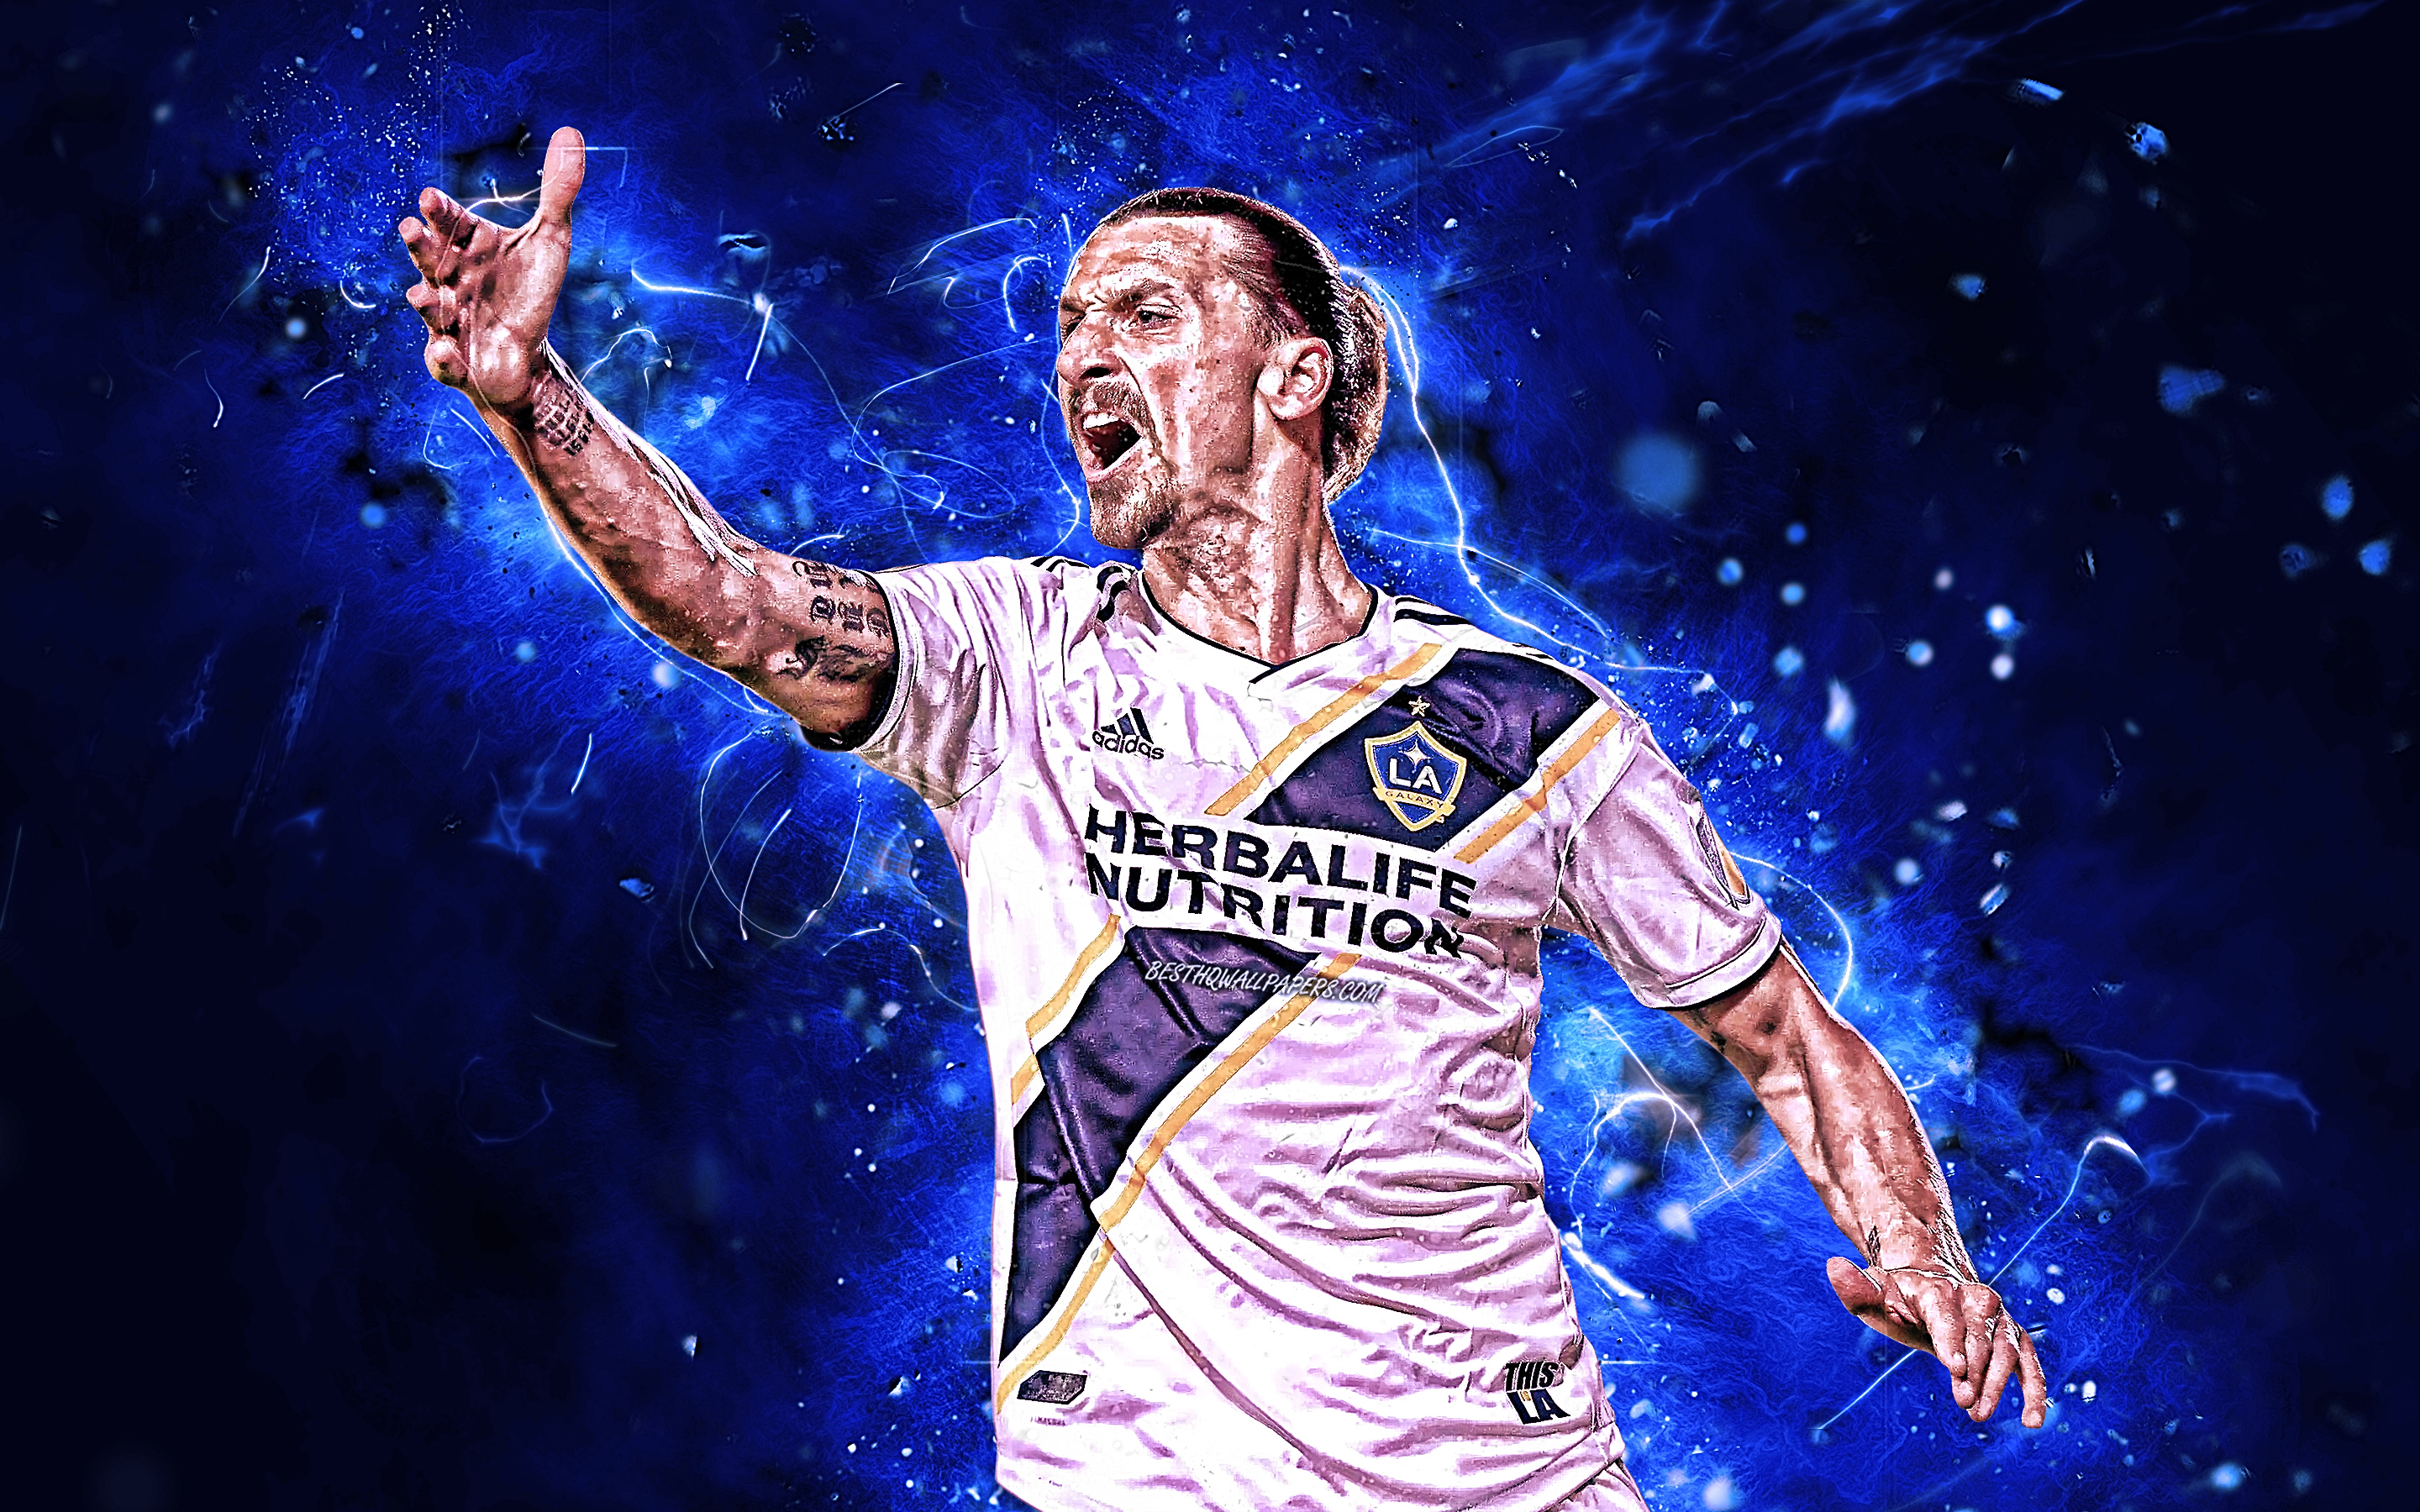 Download Wallpaper Zlatan Ibrahimovic, MLS, Close Up, Los Angeles Galaxy FC, Swedish Footballers, Football Stars, Ibrahimovic, Soccer, LA Galaxy, Abstract Art, Neon Lights For Desktop With Resolution 2880x1800. High Quality HD Picture Wallpaper